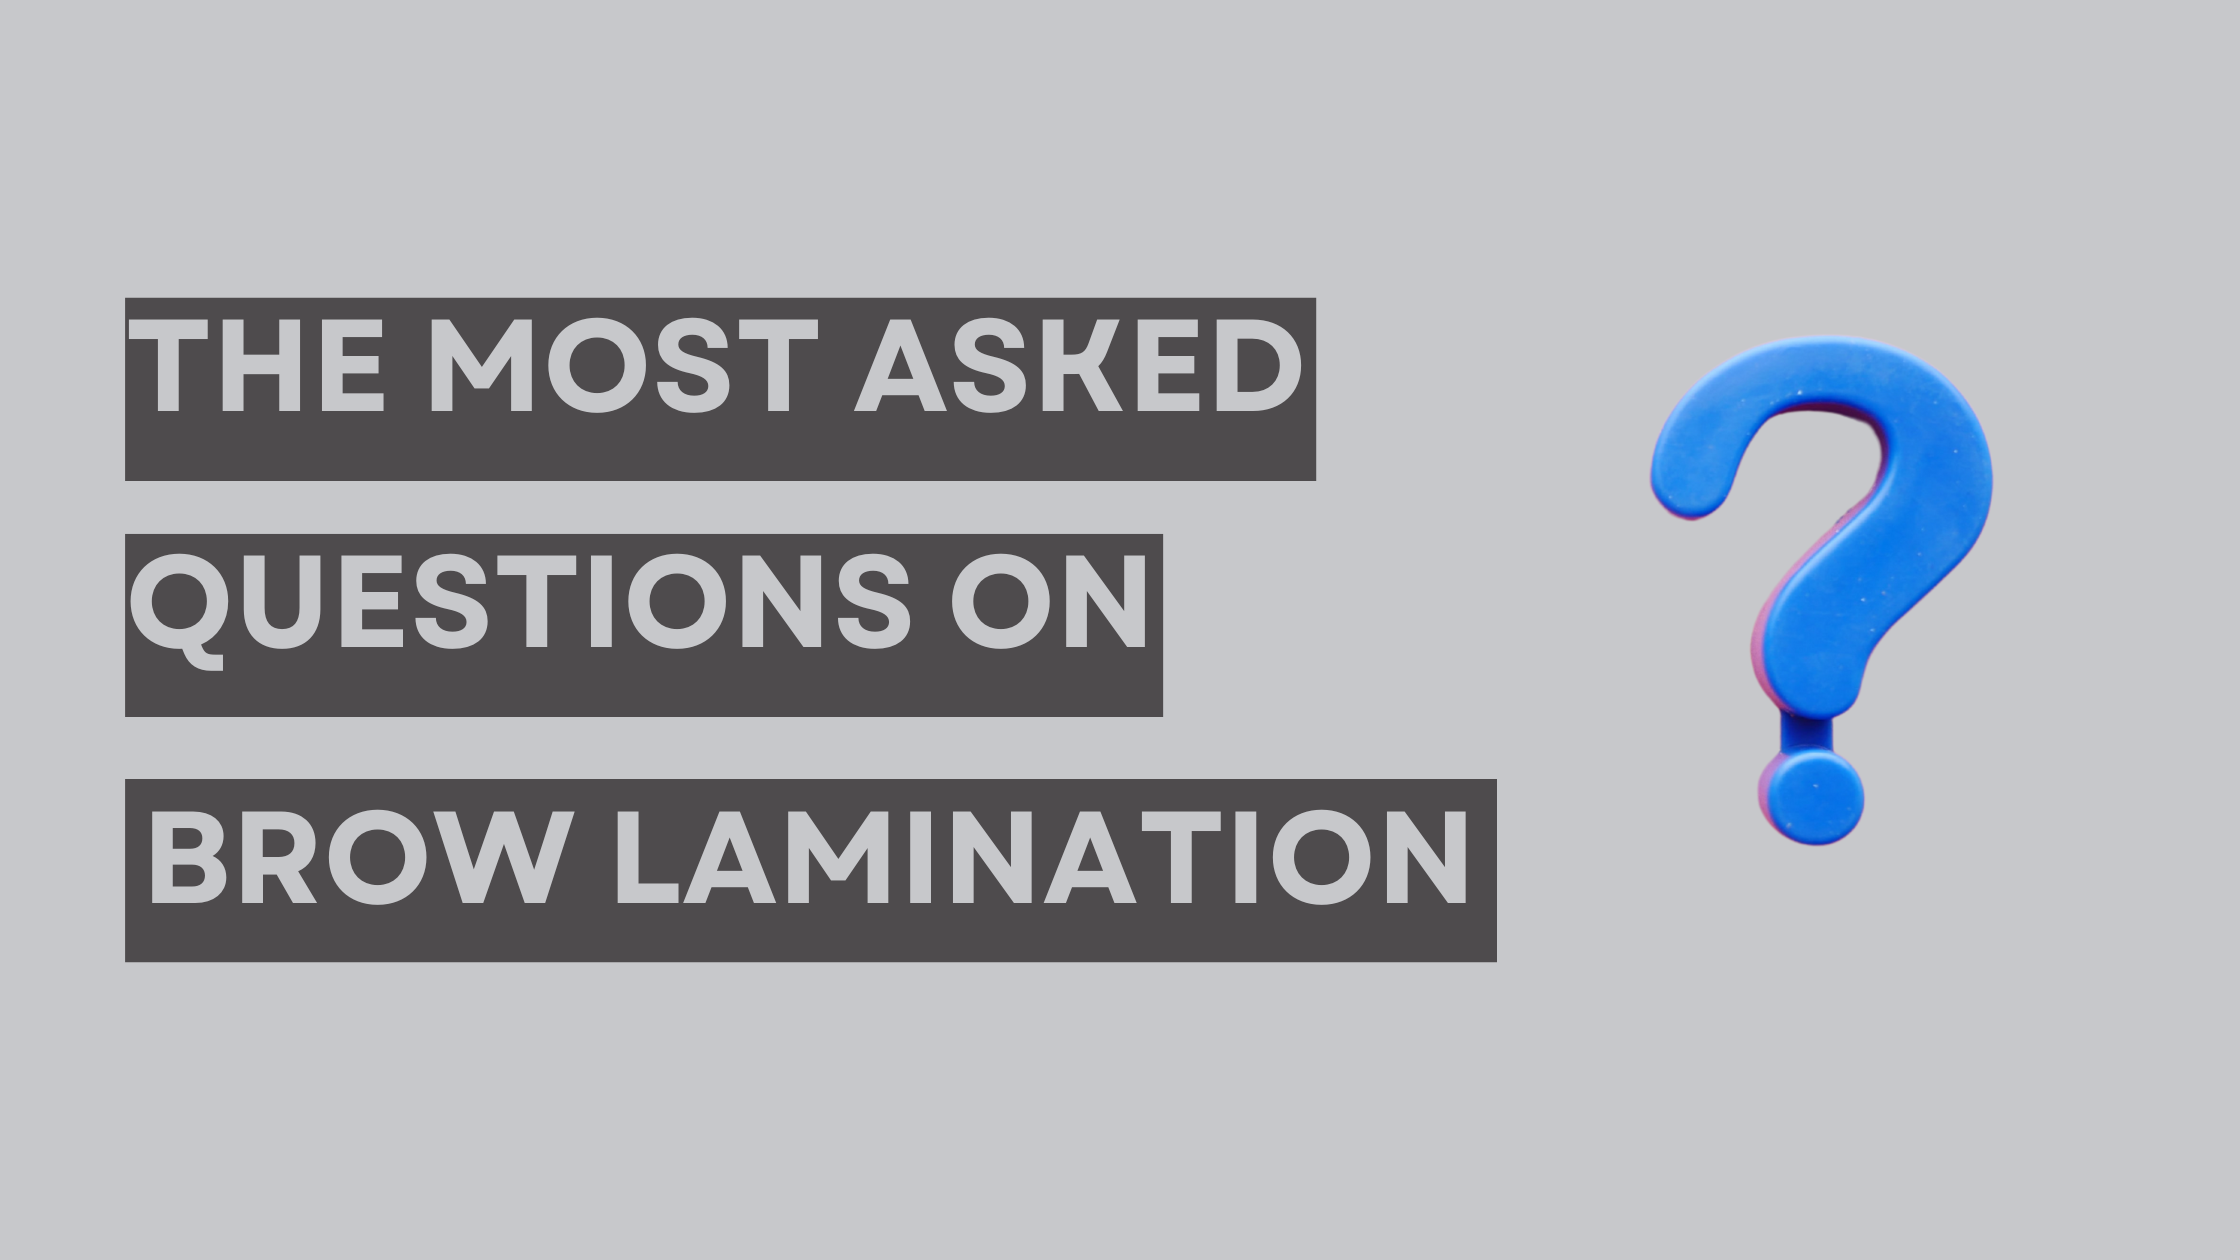 The most asked questions on brow lamination